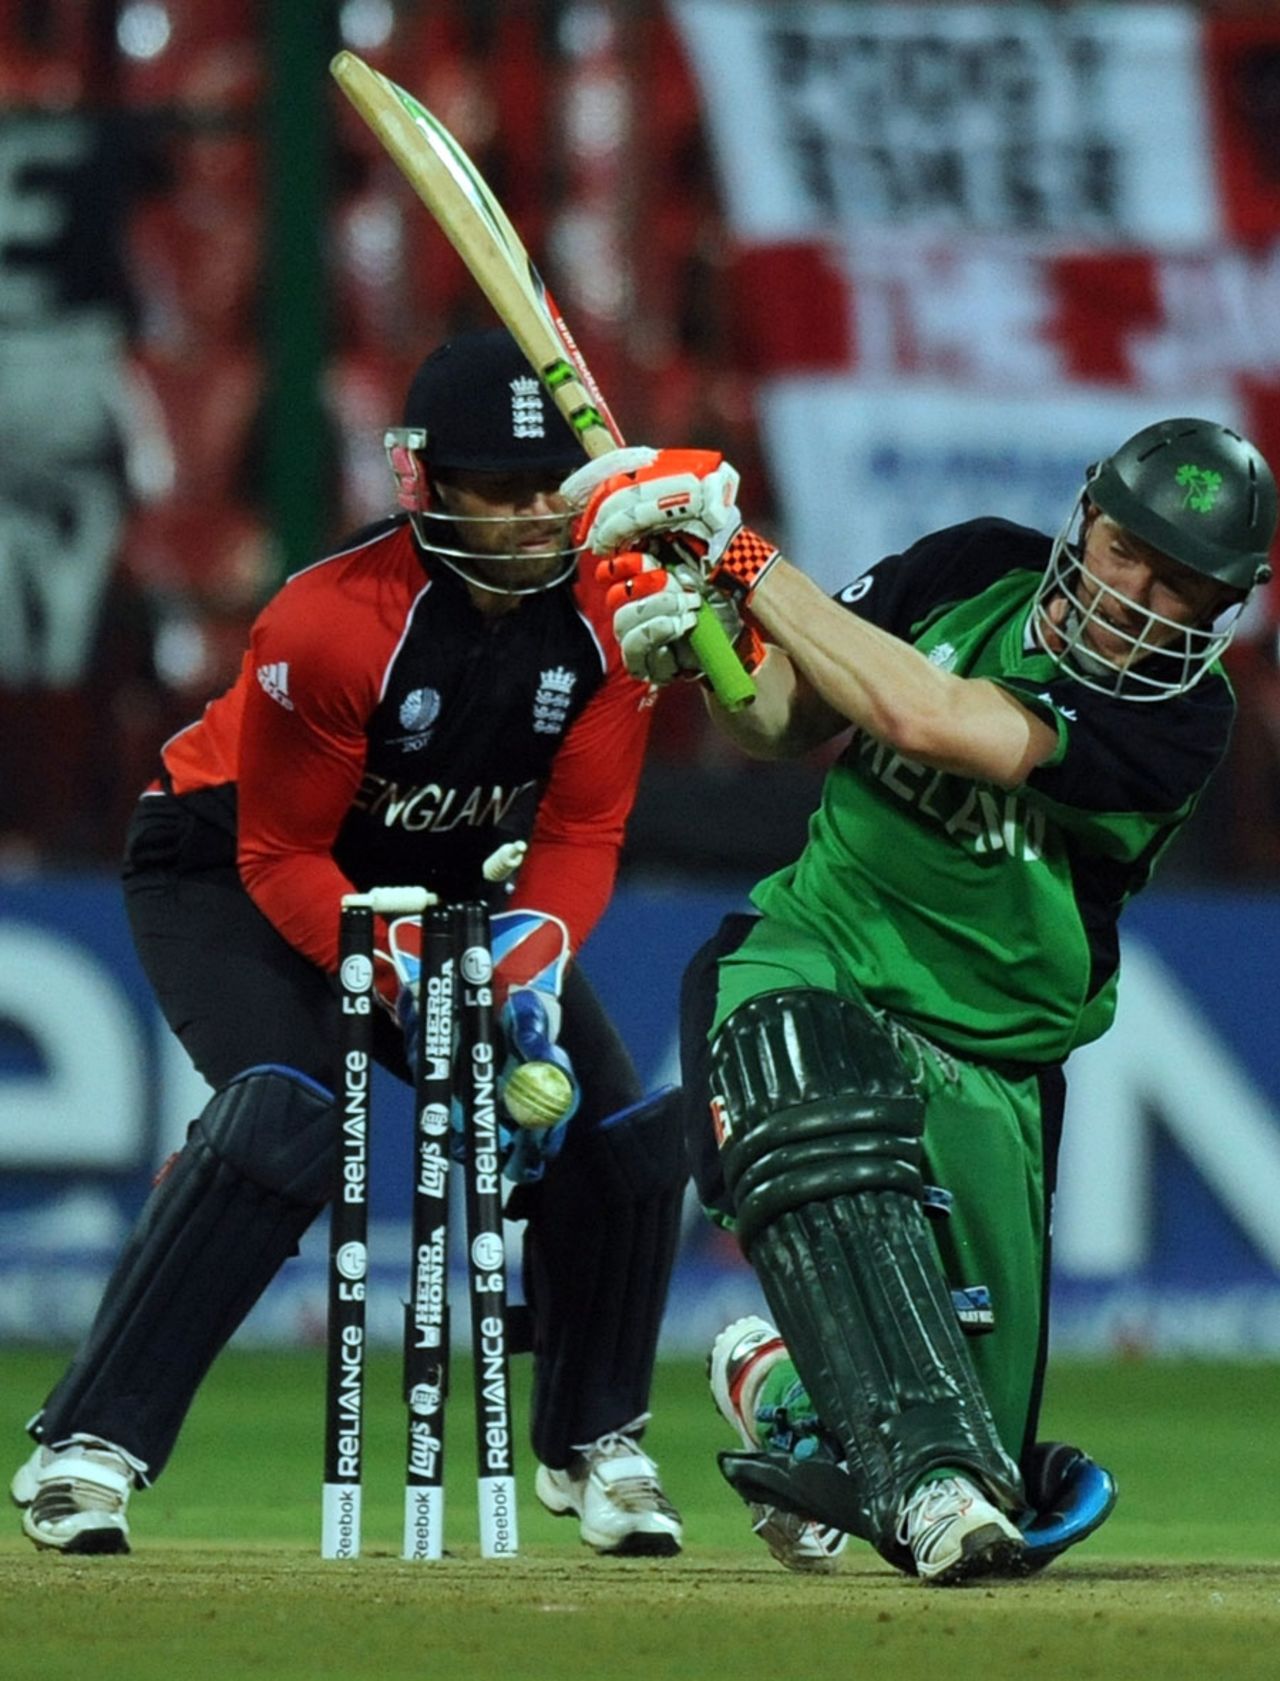 Niall O'Brien took on the slog sweep and was bowled for 29, England v Ireland, World Cup 2011, Bangalore, March 2, 2011